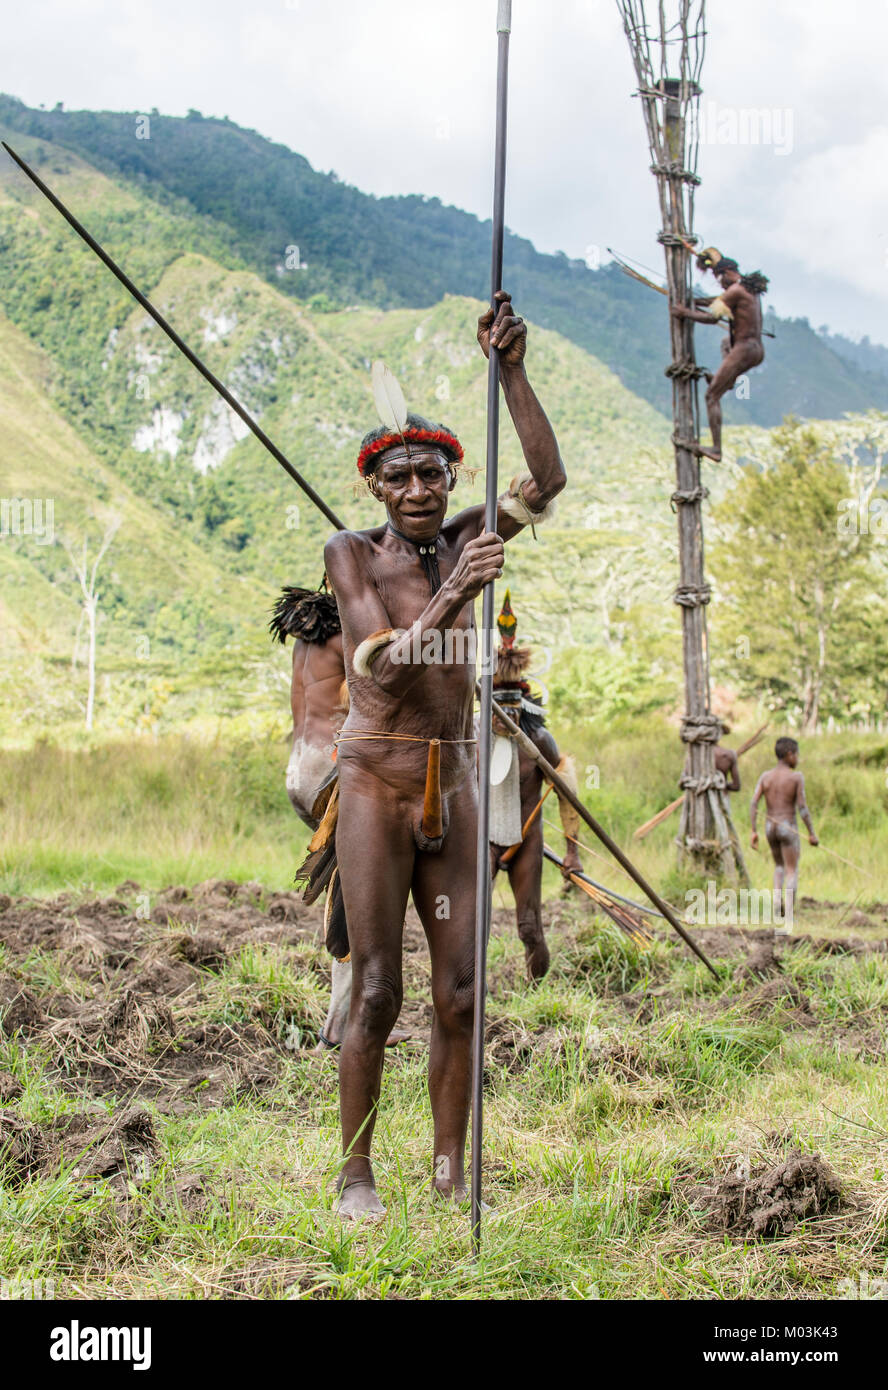 The armed Papuan. Warrior of Dani Dugum tribe with spear. June 4, 2016, New Guinea Island. Stock Photo